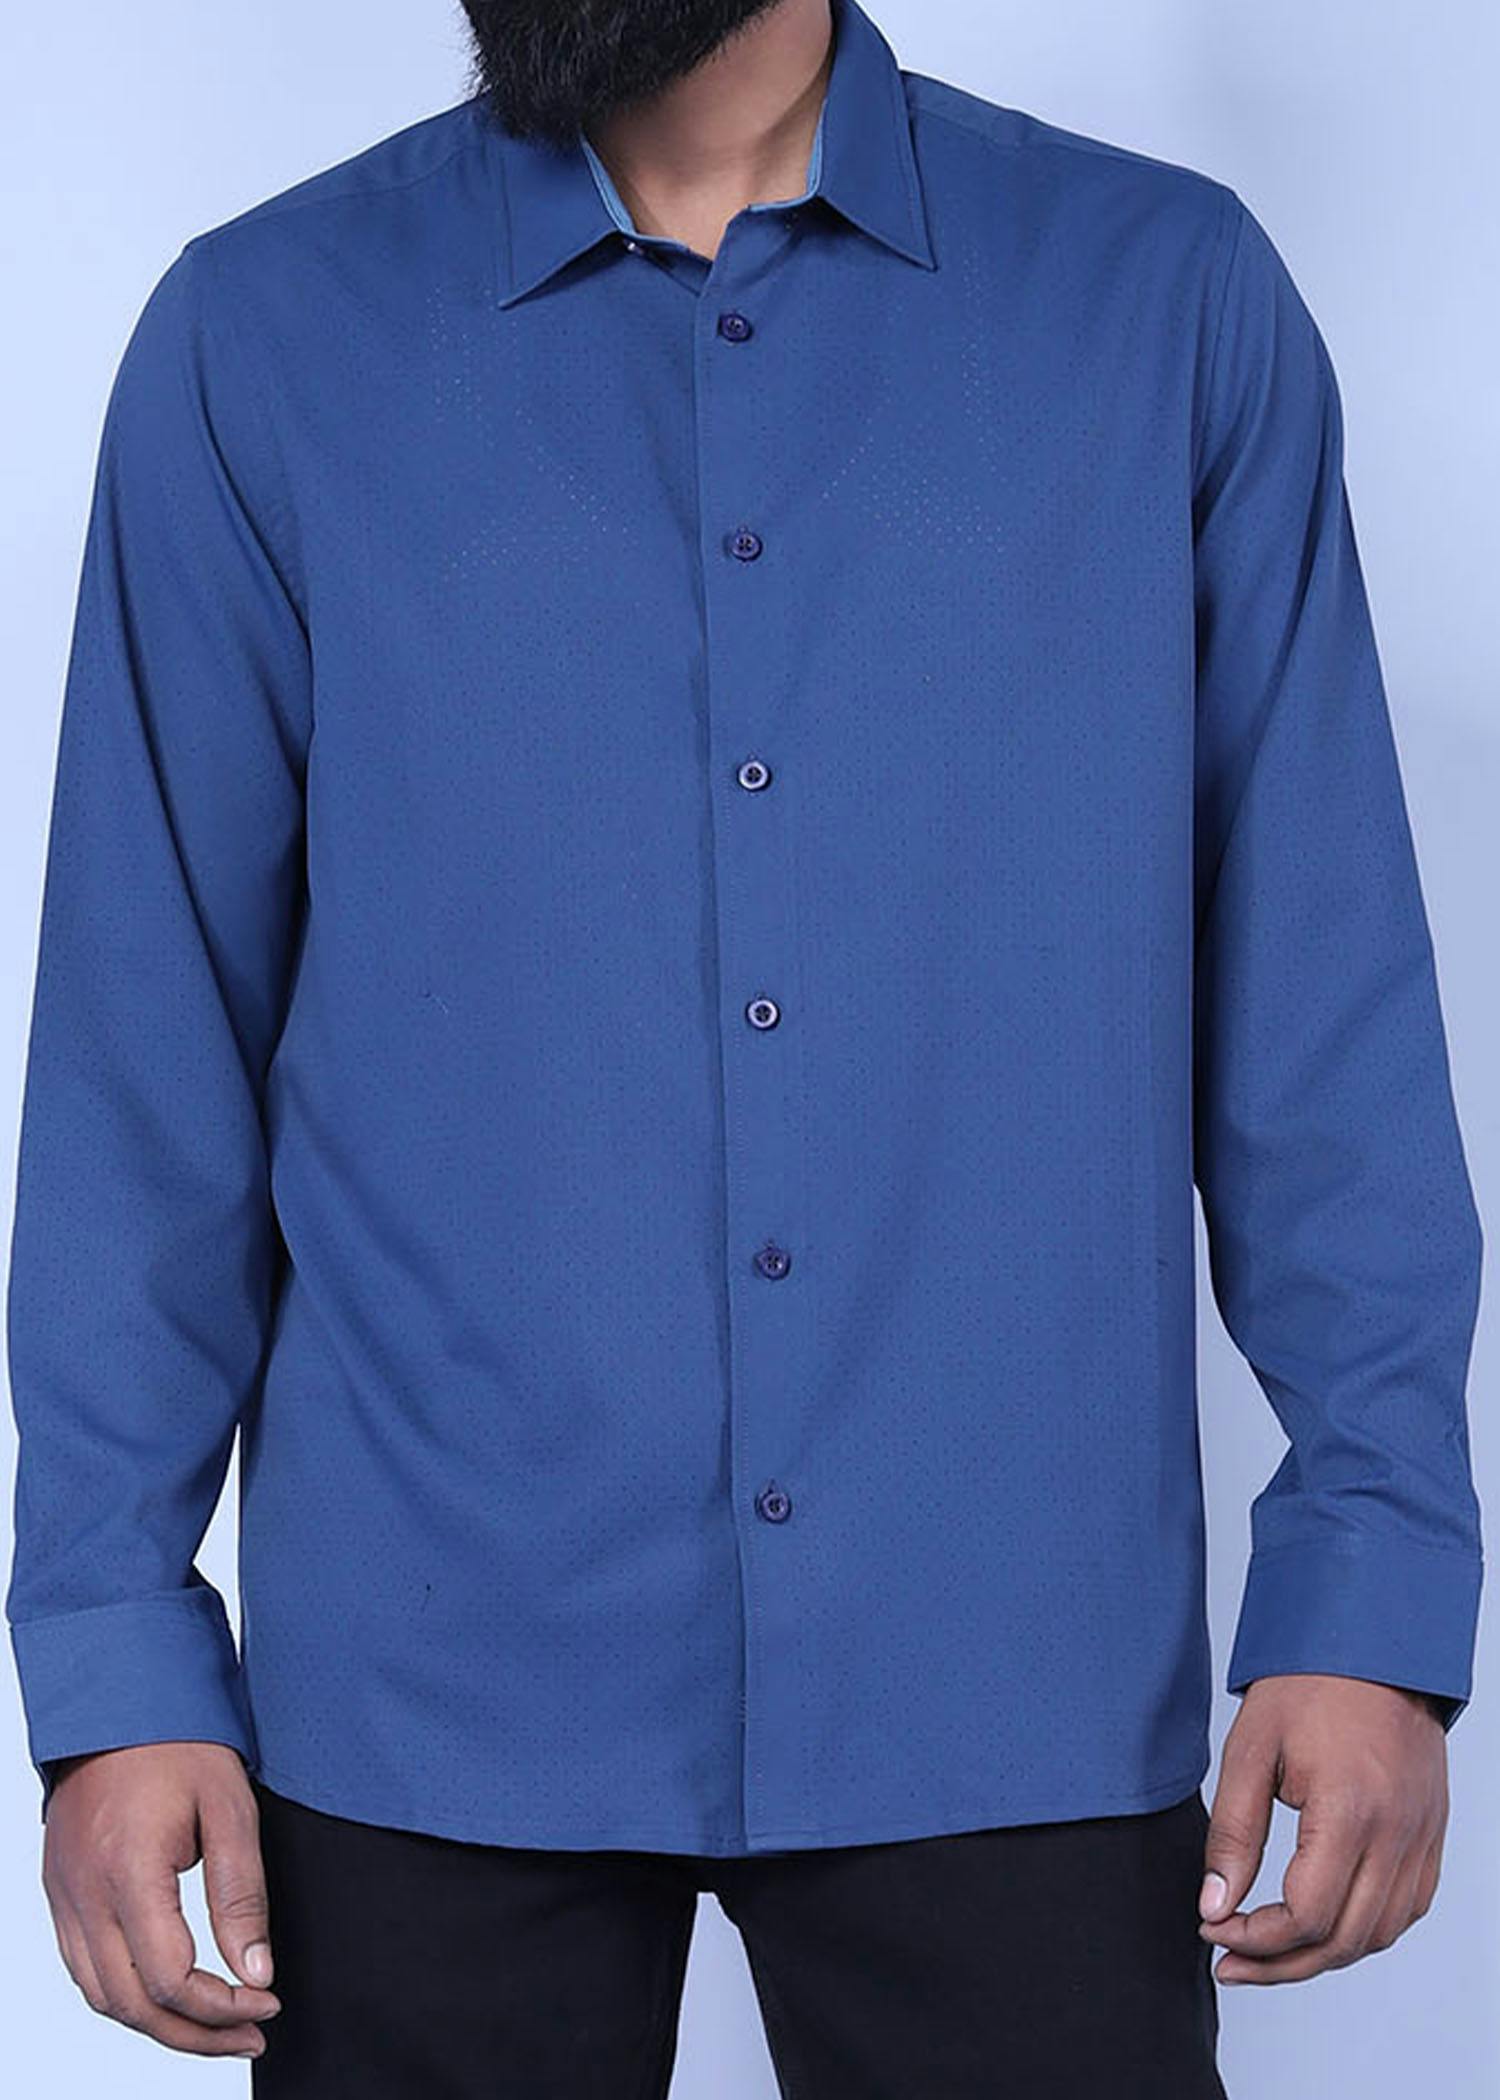 istanbul vi ls shirt navy color facecropped